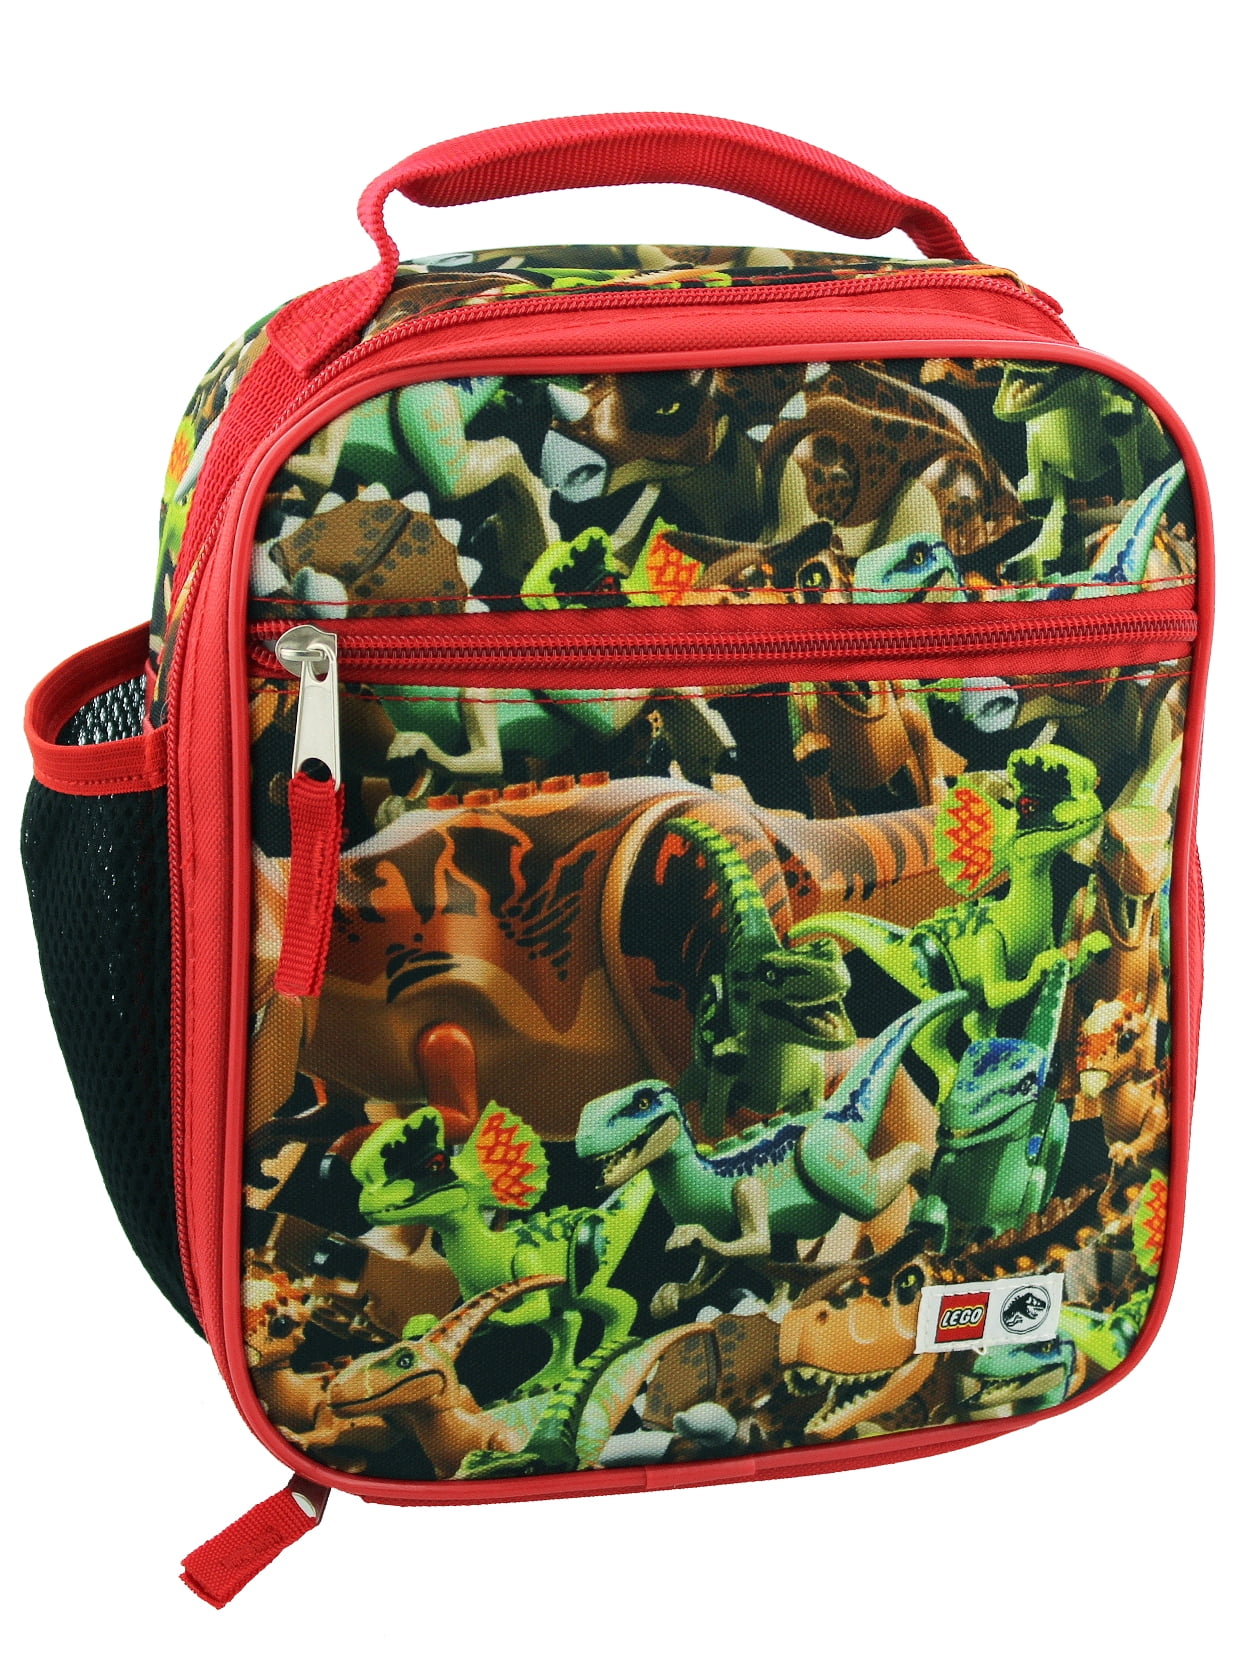 Jurassic World Backpack Insulated Thermal Cooler Dinosaur Lunch Box Pen Bag Lot 